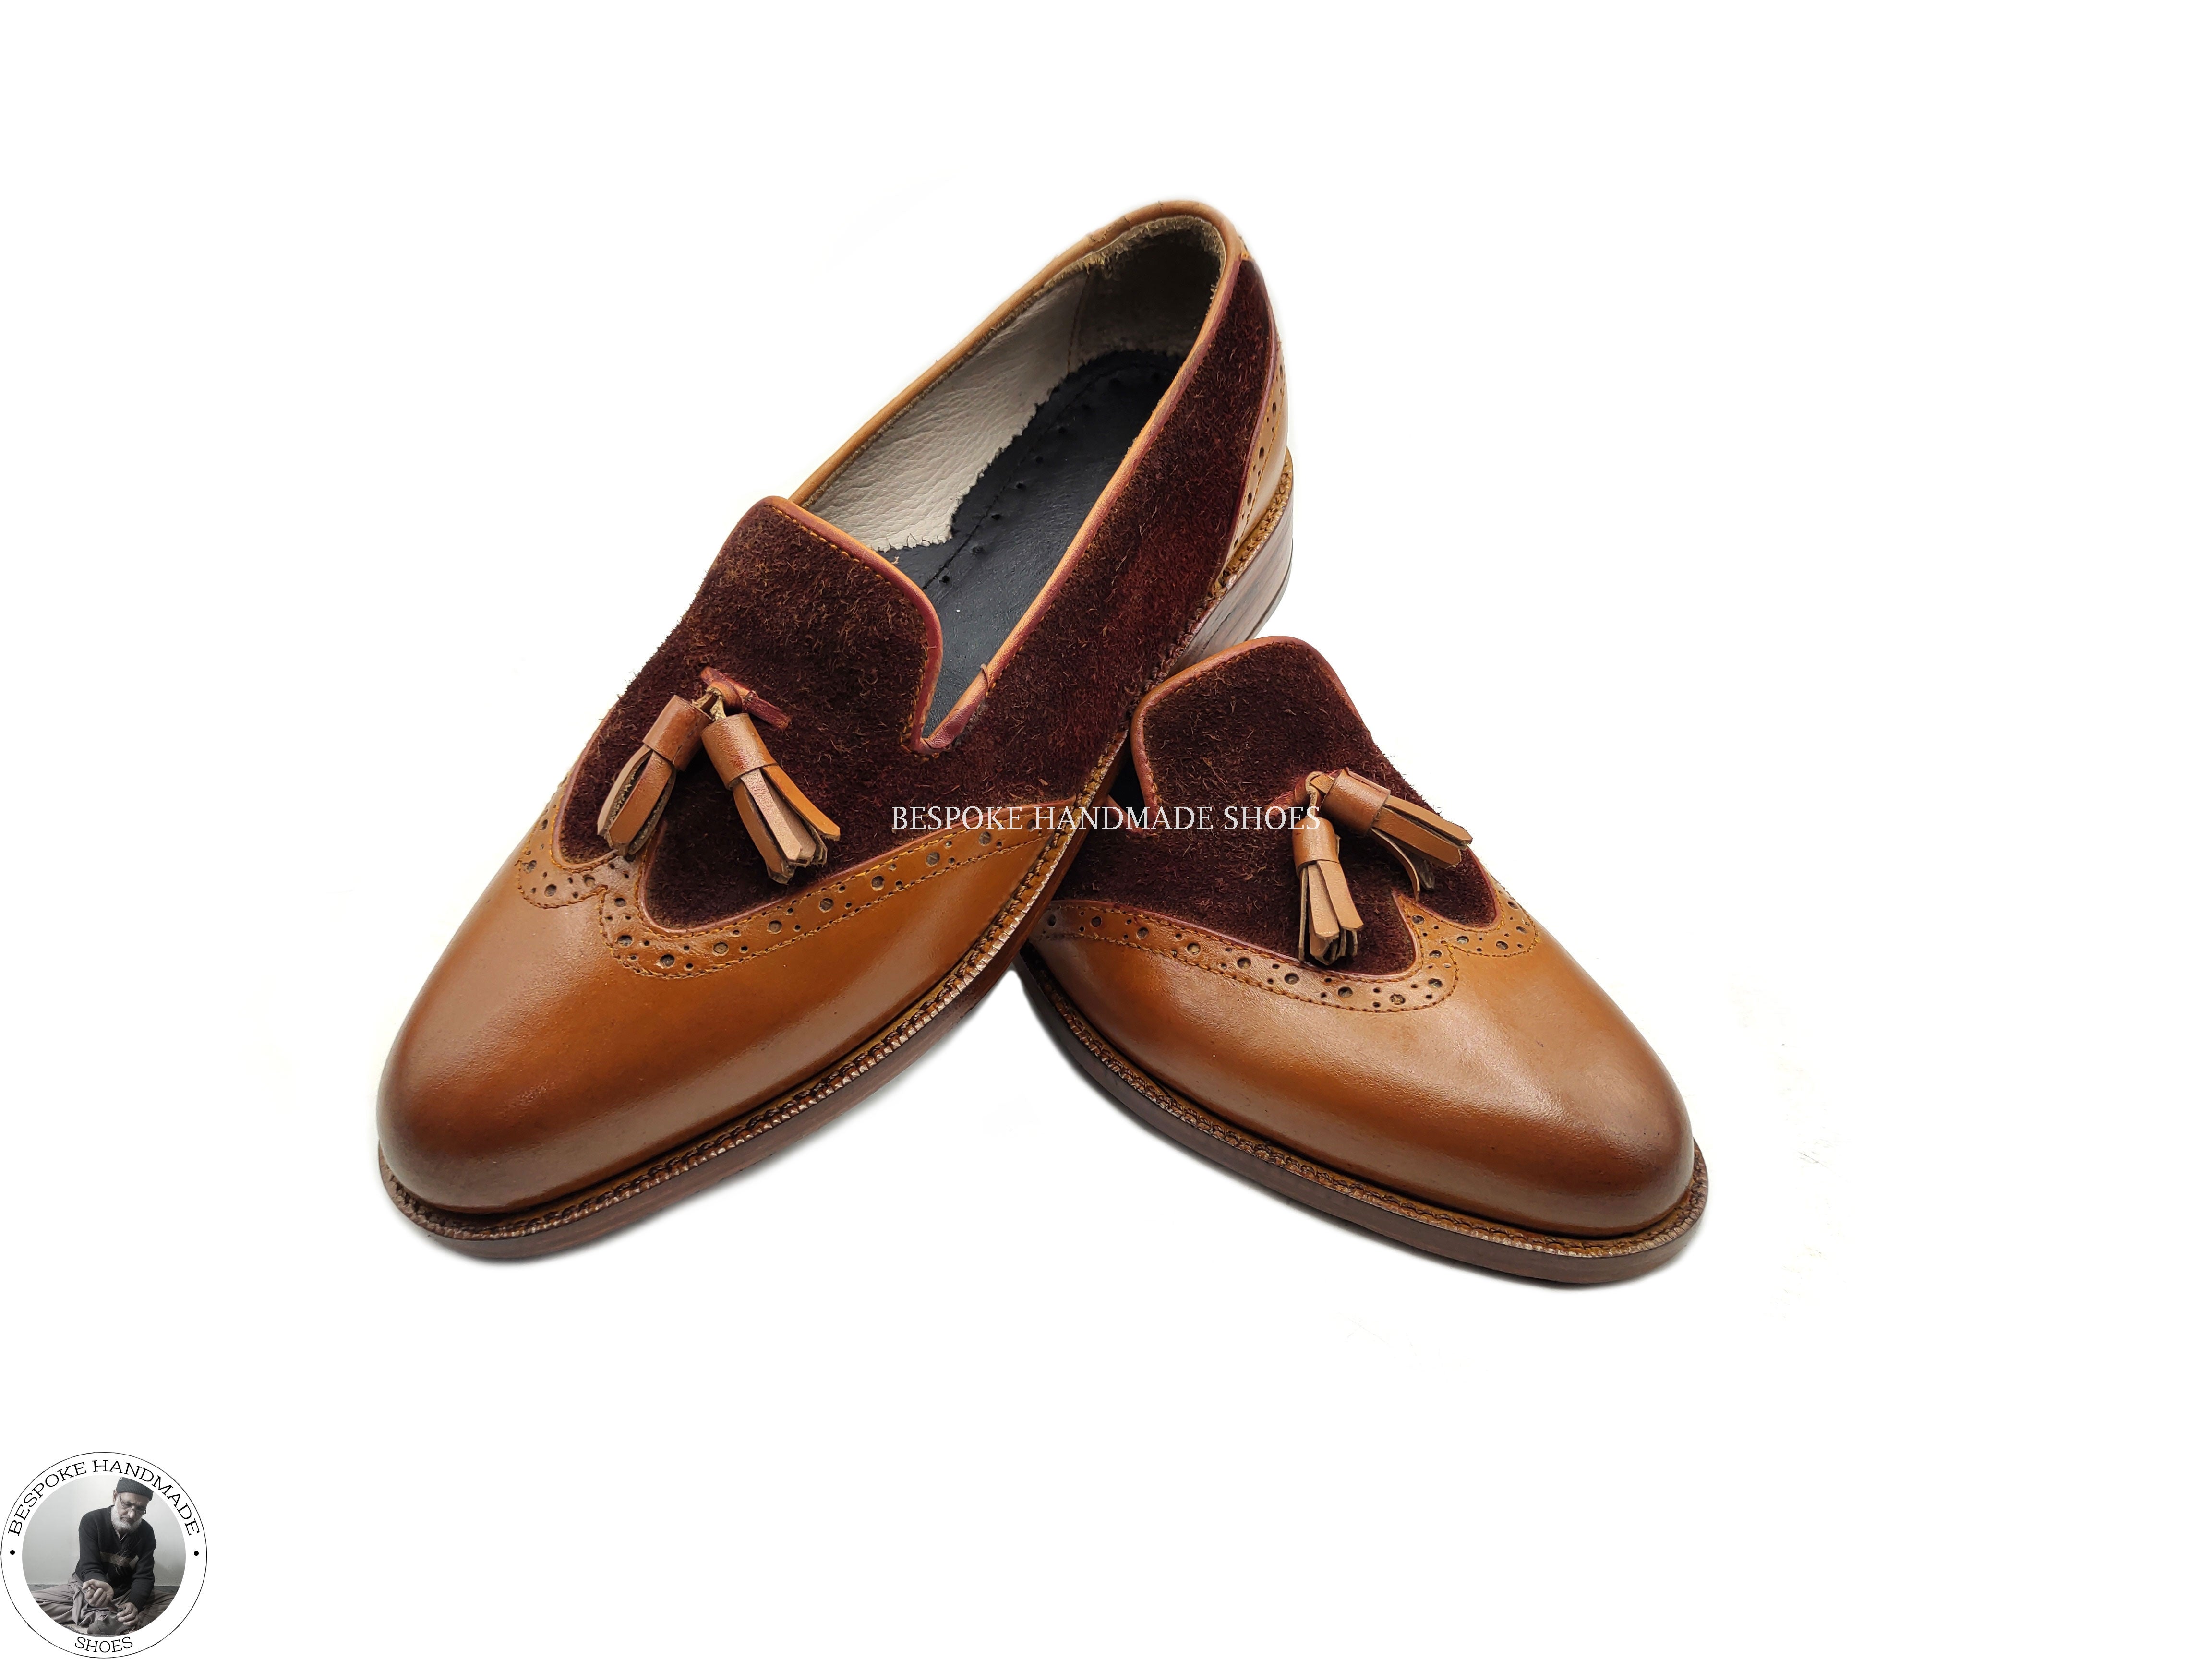 Bespoke Handmade Stylish Brown Leather And Suede Loafer Style Leather Tassels Casual Shoes